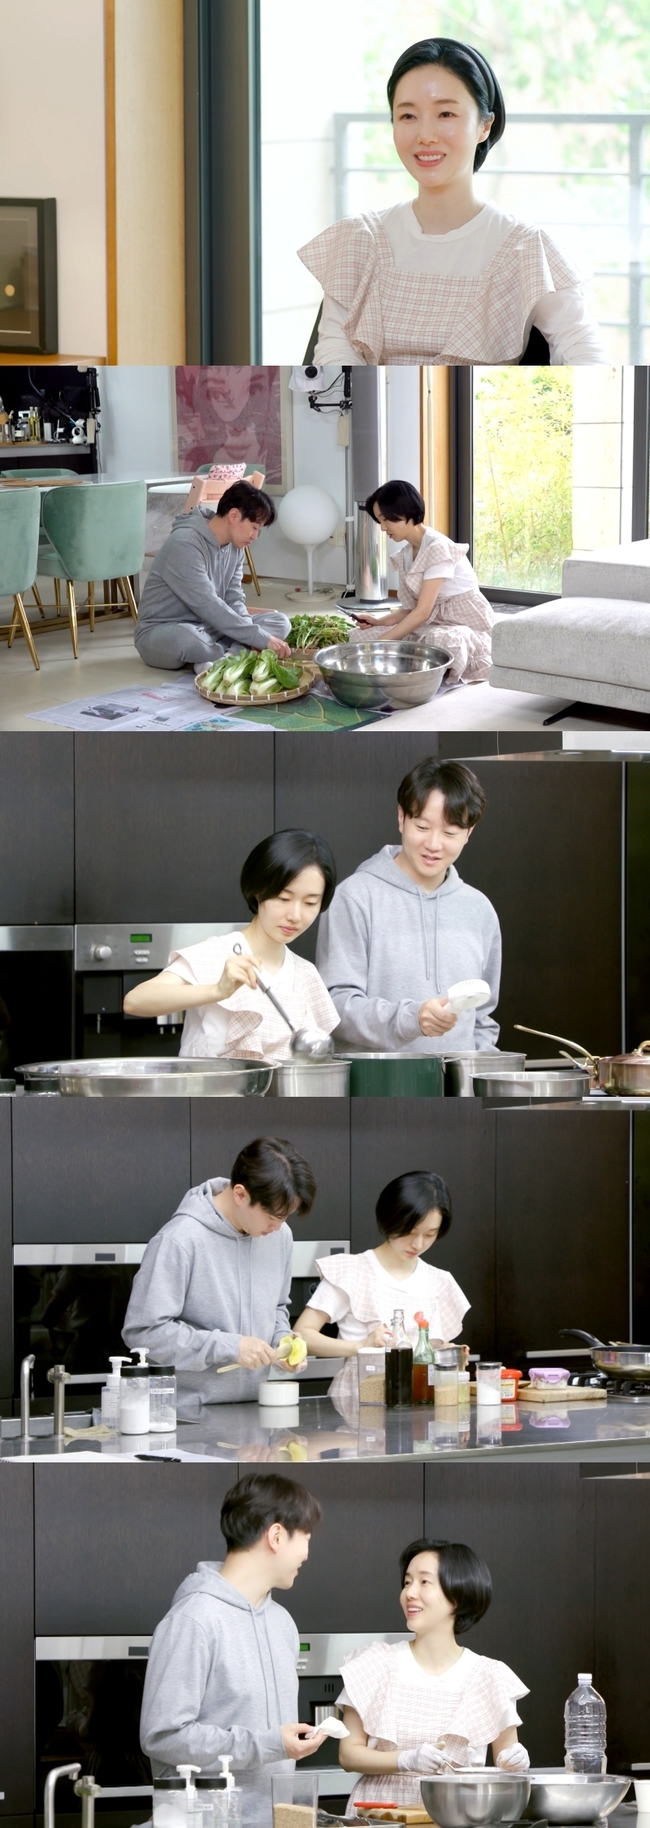 Lee Jung-hyun Husband shows off his wifes bodyguard sideLee Jung-hyuns daily life will be revealed on KBS 2TV  ⁇  Stars Top Recipe at Fun-Staurant  ⁇  ( ⁇  Stars Top Recipe at Fun-Staurant  ⁇ ) broadcast on July 14th.Lee Jung-hyun, who returned to Stars Top Recipe at Fun-Staurant after three years as a mother, revealed his daily life with friendly Husband.Lee Jung-hyun Husband has attracted attention with his charming and charming charm, which is nicknamed romantic doctor at the same time as his first appearance. Lee Jung-hyun Husbands wife is also revealed on this days broadcast.Lee Jung-hyun decided to make a kimchi for the summer. At this time, Lee Jung-hyuns Husband, who was at home on holiday, appeared silently and spread a newspaper on one floor of the living room.Husband, who sat next to his wife and began to polish the heat, was like a surgical Physician, holding a knife like a surgical knife and concentrating seriously on his work, making Lee Jung-hyun laugh.Since then, Lee Jung-hyun Husband has been sensible when Lee Jung-hyun has been cooking and has prepared everything he needs without telling him what he needs.In addition to arranging his wifes hair, he arranged his apron and looked at his wife delicately. ⁇  Stars Top Recipe at Fun-Staurant  ⁇  The family members are waiting for the appearance of Lee Jung-hyun Husband  ⁇  romantic doctor  ⁇   ⁇ .On the other hand, Lee Jung-hyun Husband, in an interview with the production team without his wife, expressed his deep gratitude to his wife who always takes care of the meal carefully and confessed that his job is Physician but my doctor seems to be his wife.